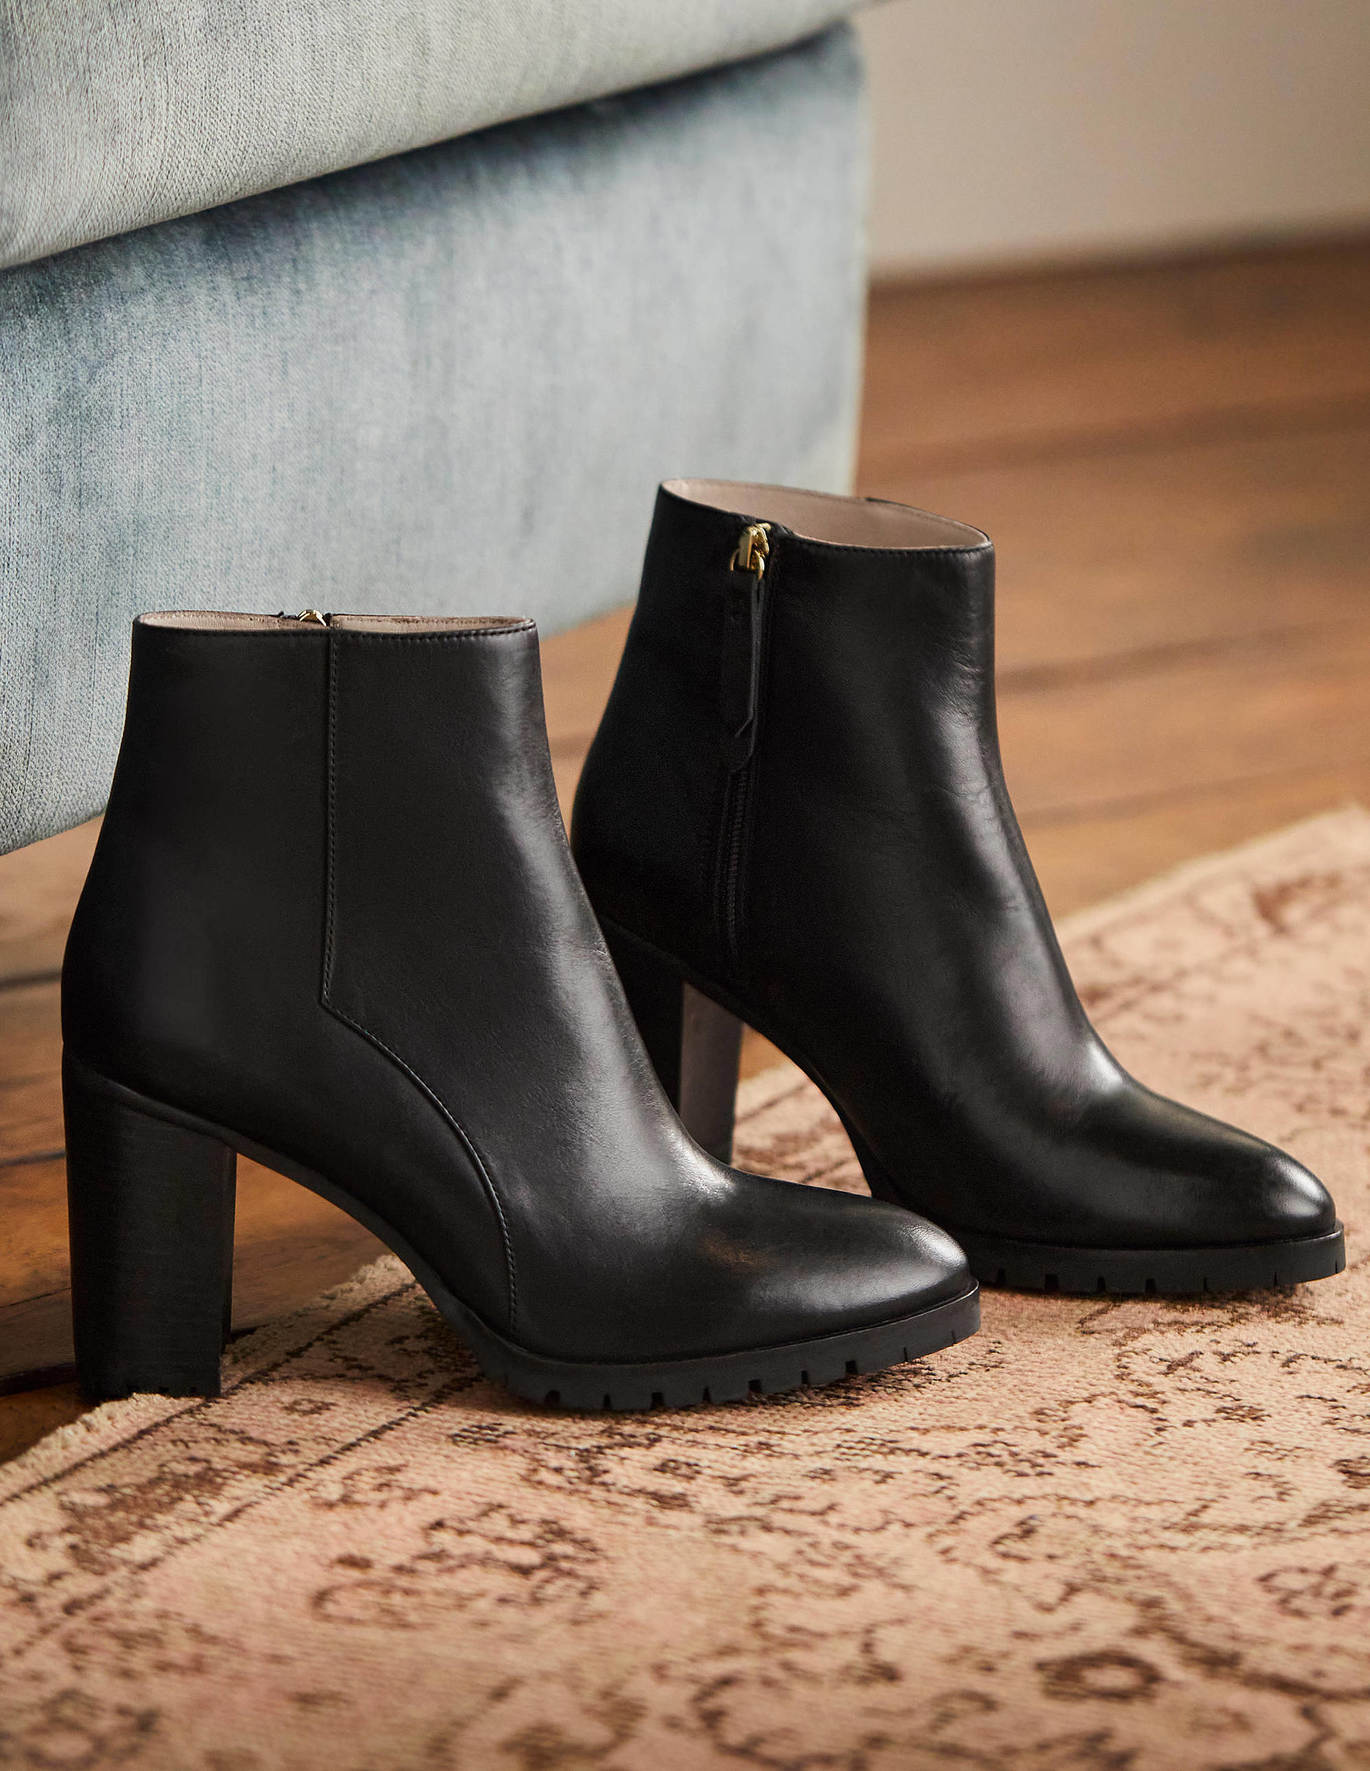 Boden Heeled Leather Ankle Boots - Black